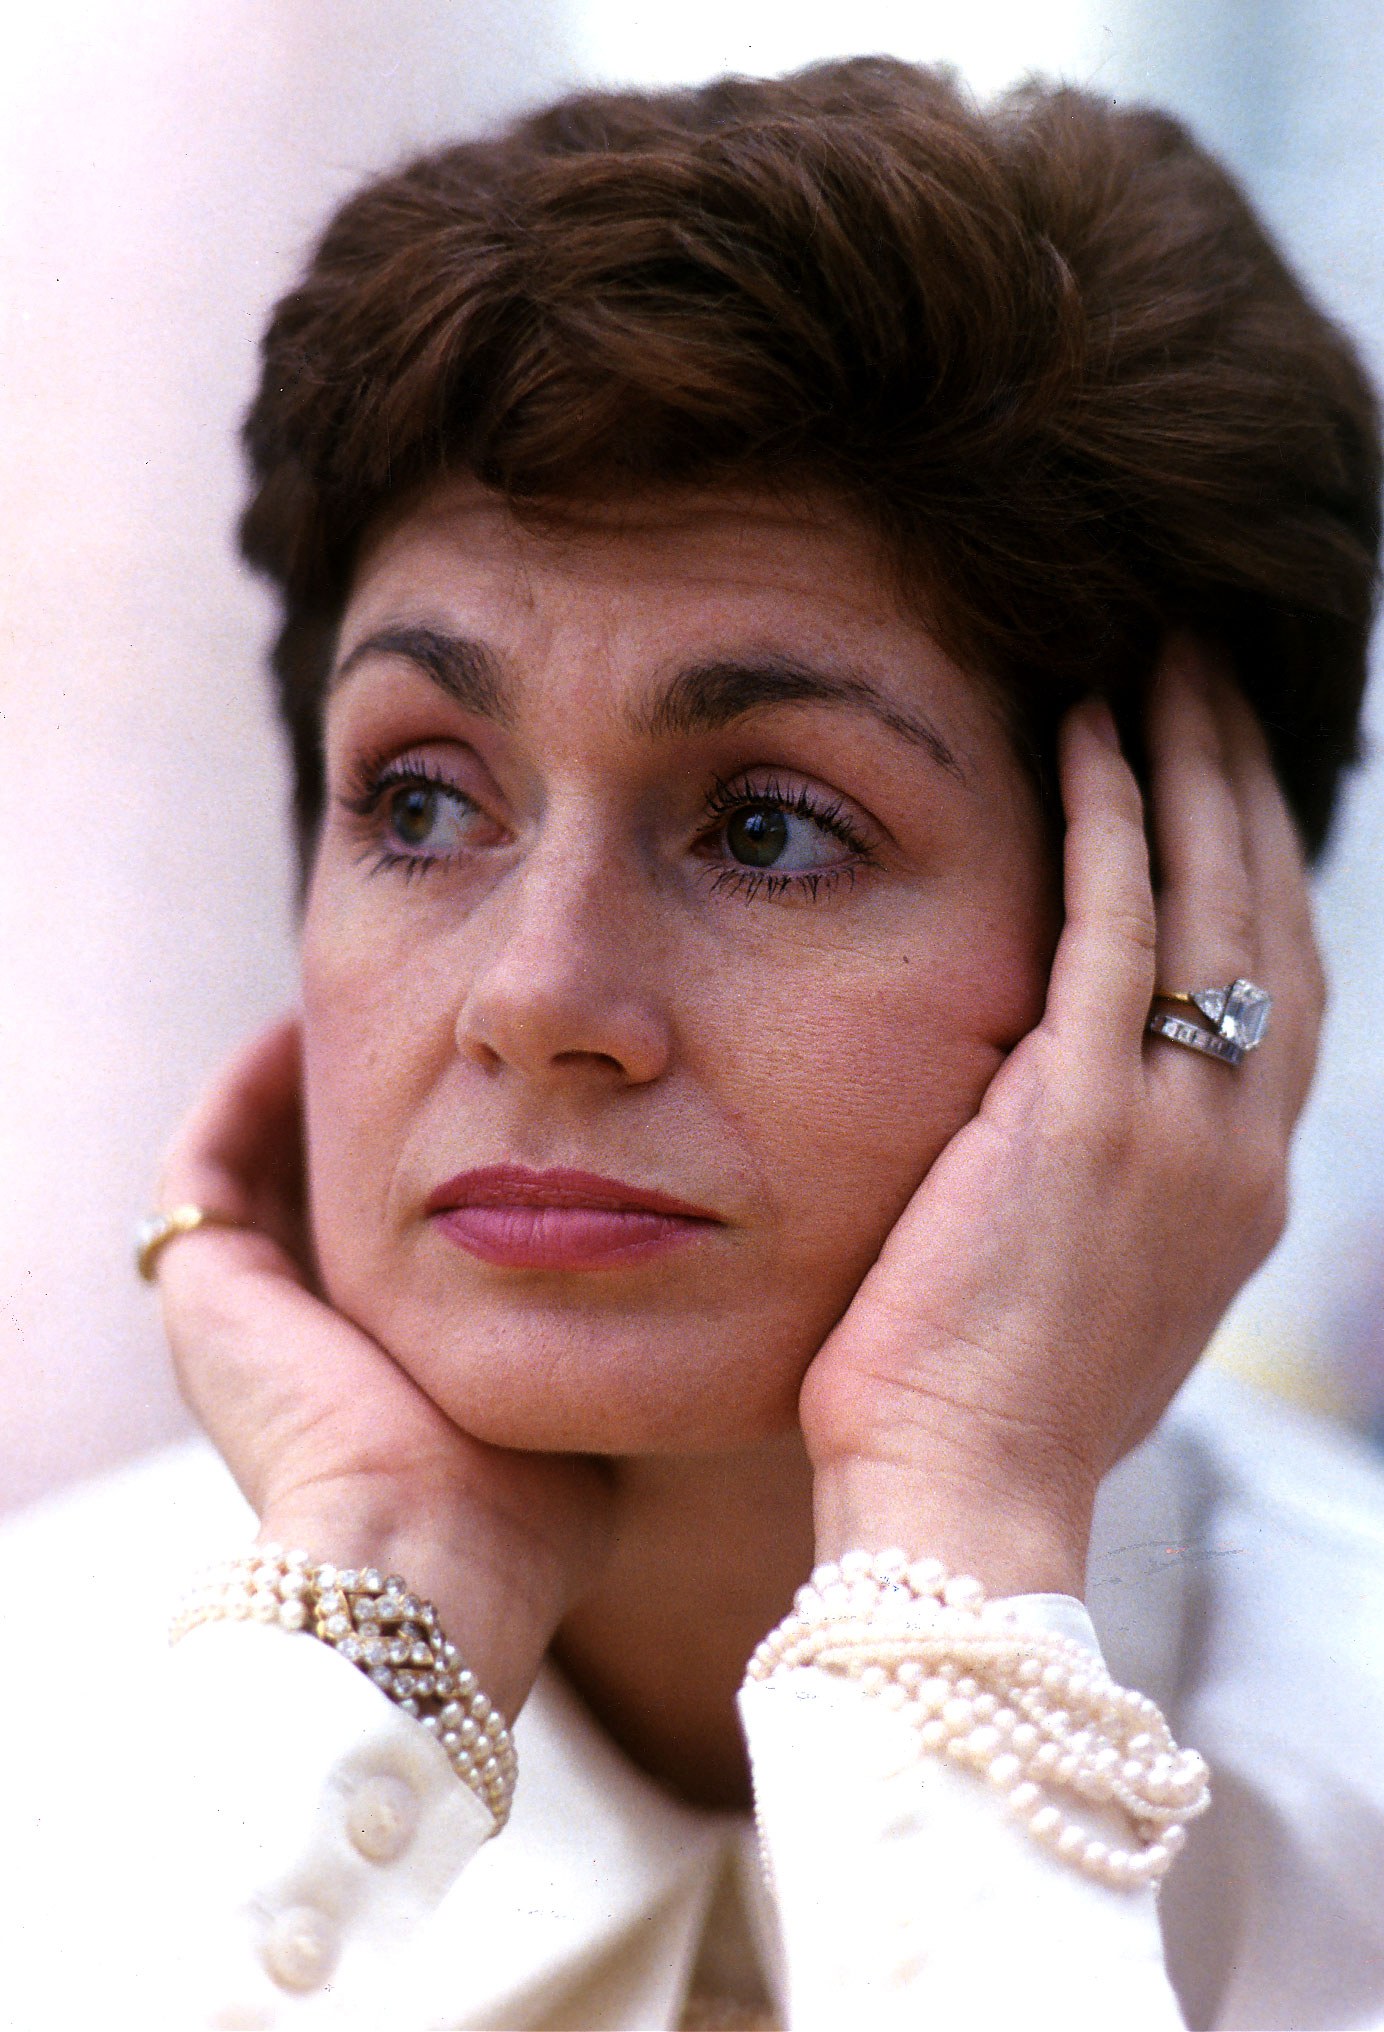 Sharon Osbourne on August 11, 1989 | Source: Getty Images